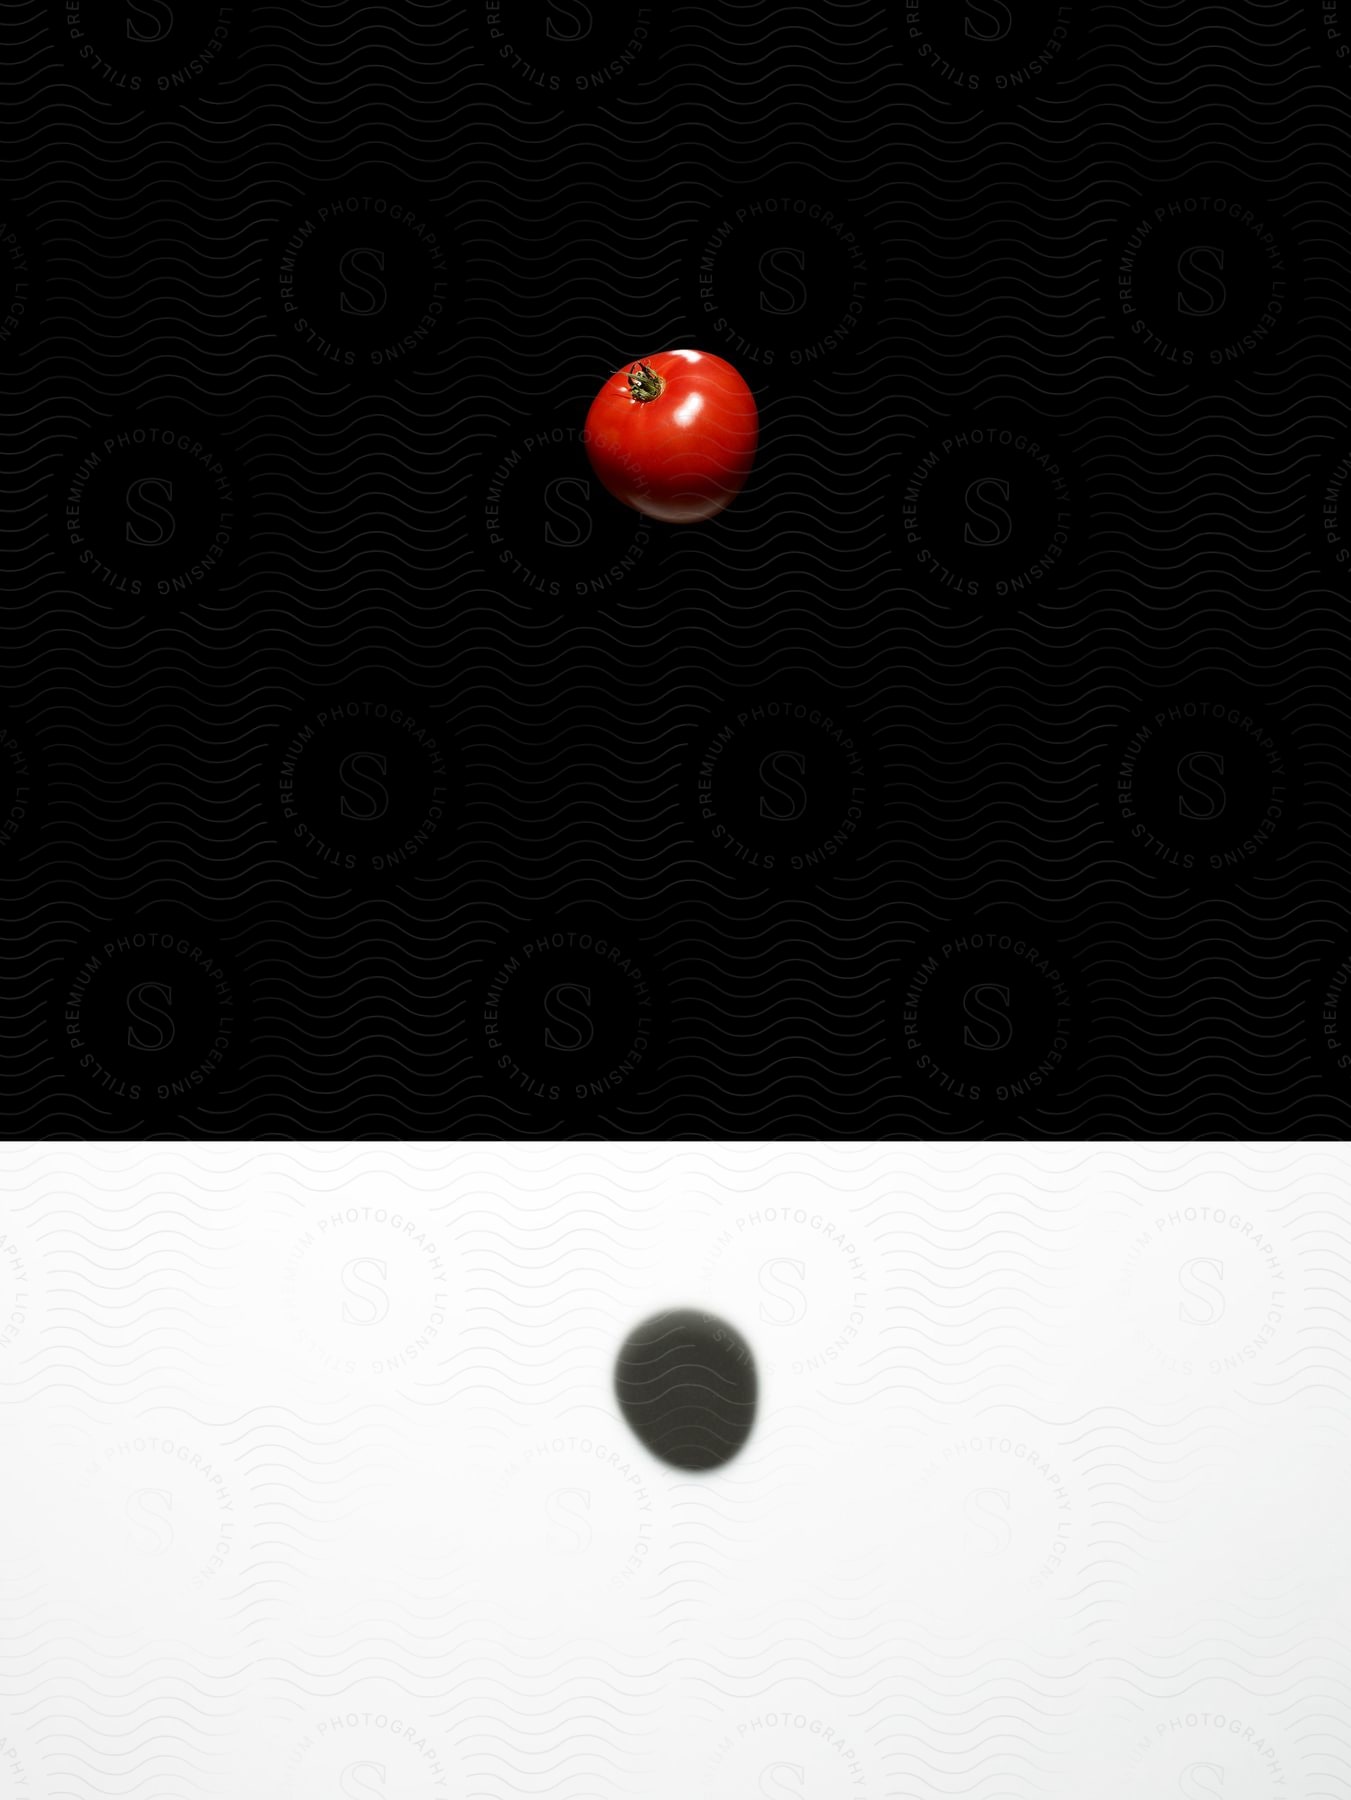 A tomato suspended in midair against a black background with its shadow below on a white surface